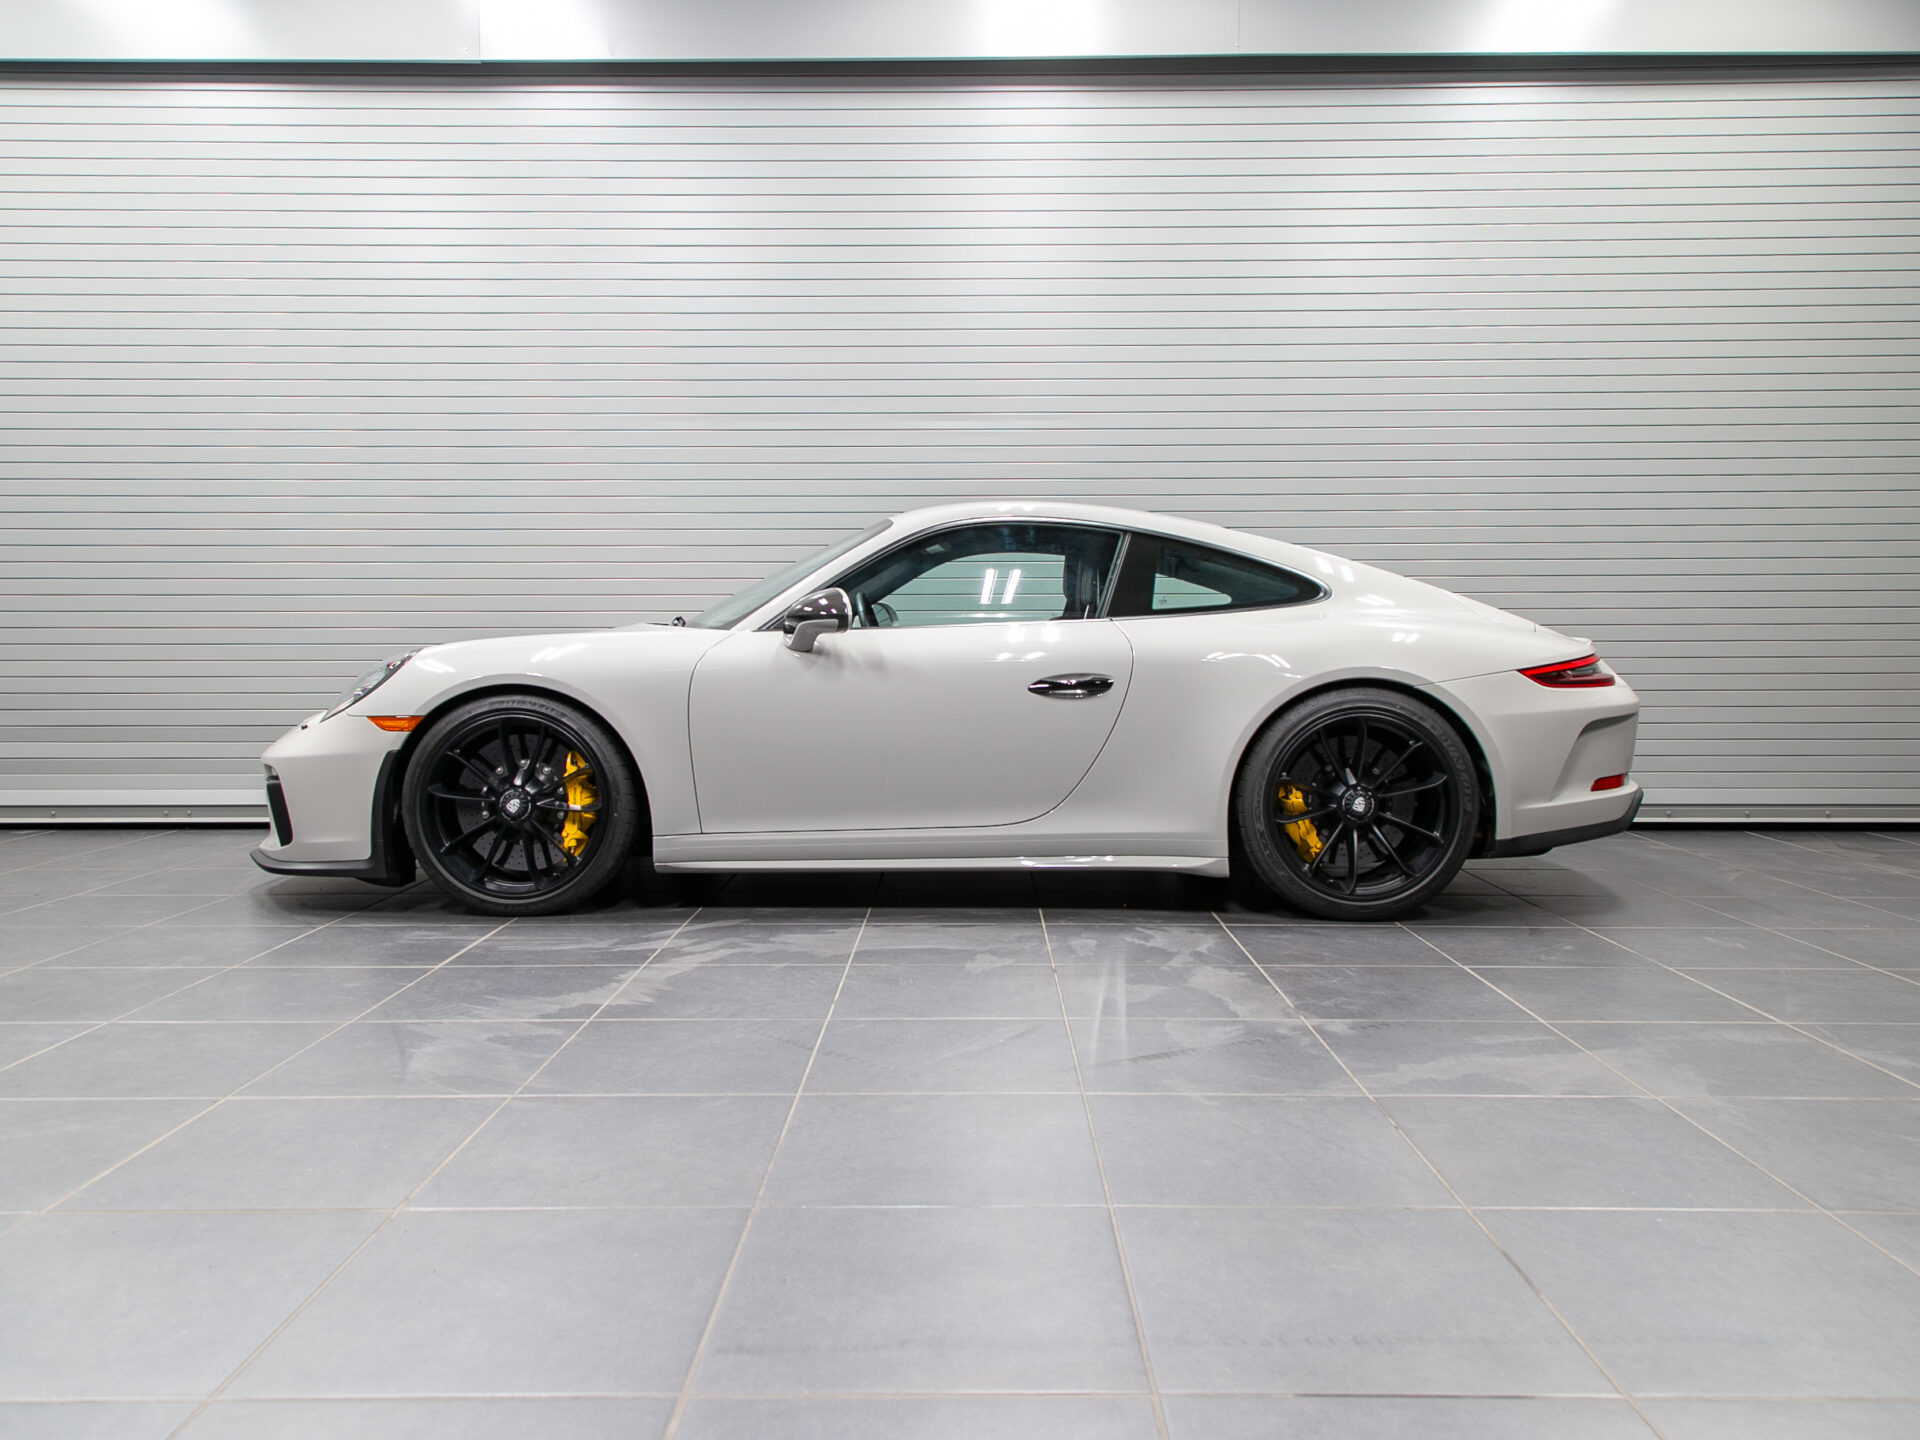 Porsche - Porsche Exclusive options: Interior trim package with contrasting  leather - seat centres; interior trim package with contrasting leather -  armrests; dashboard trim package in leather, air vent slats in leather